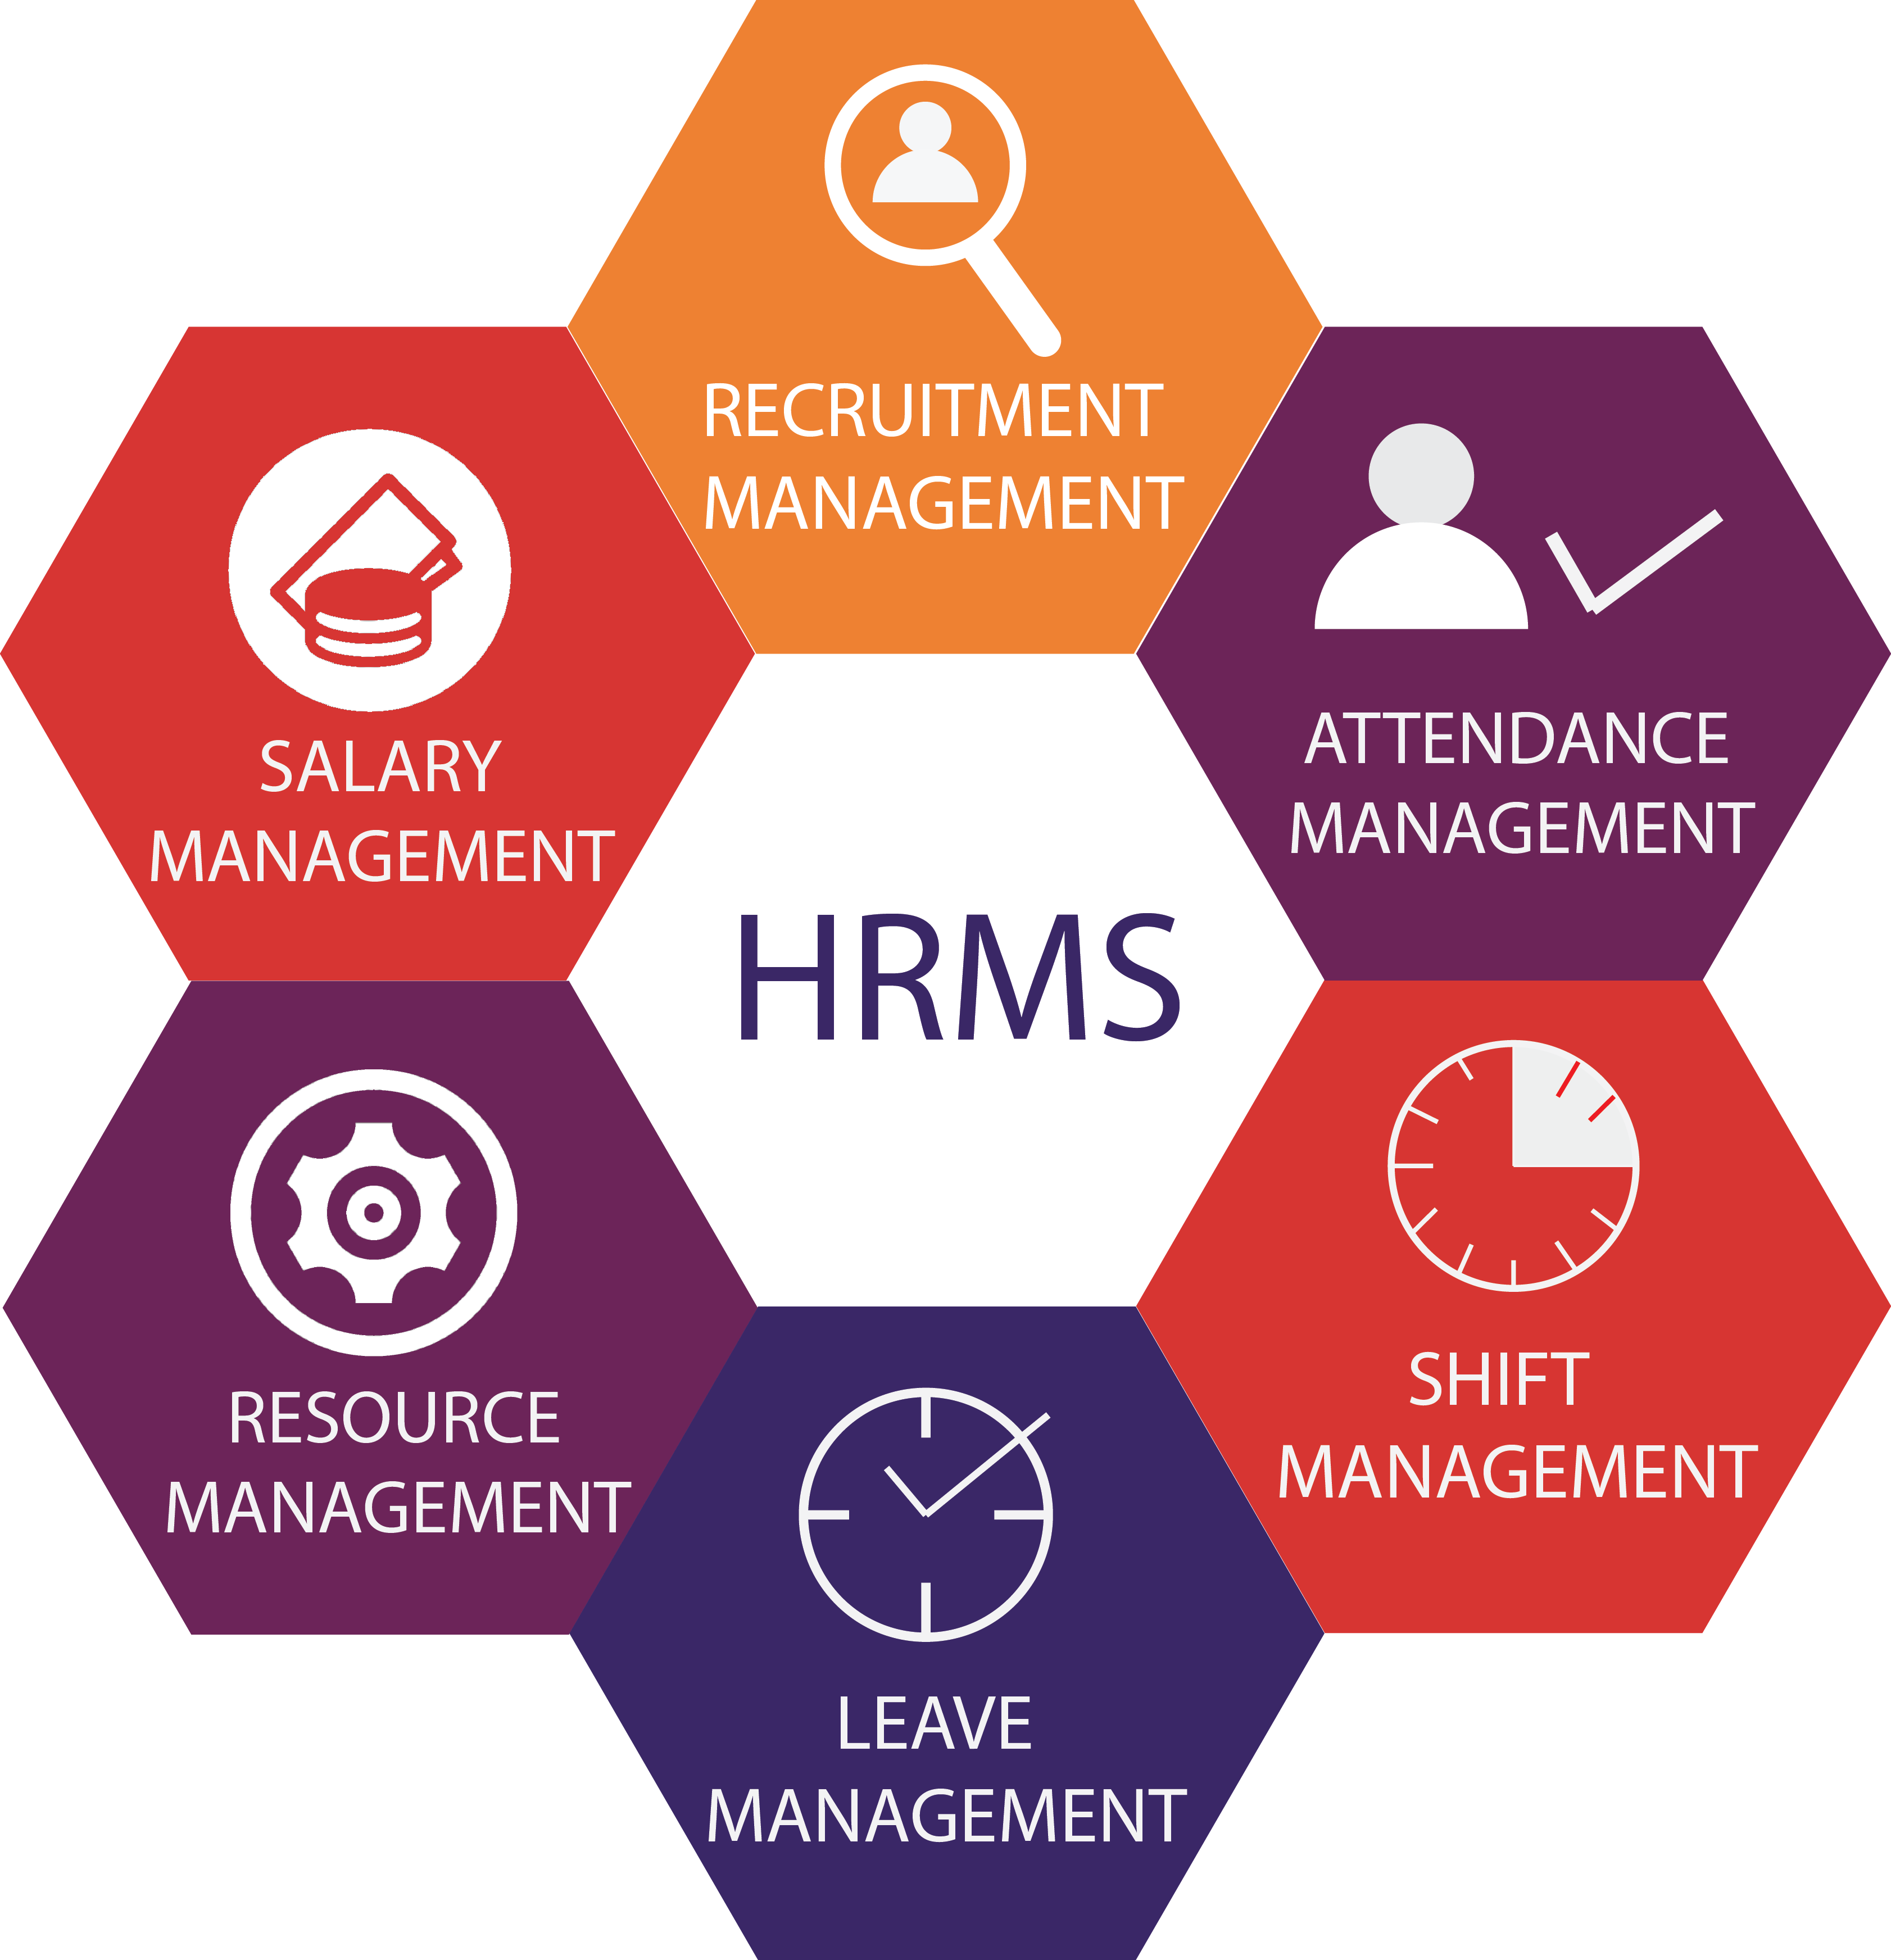 Various services provided under the HRMS software